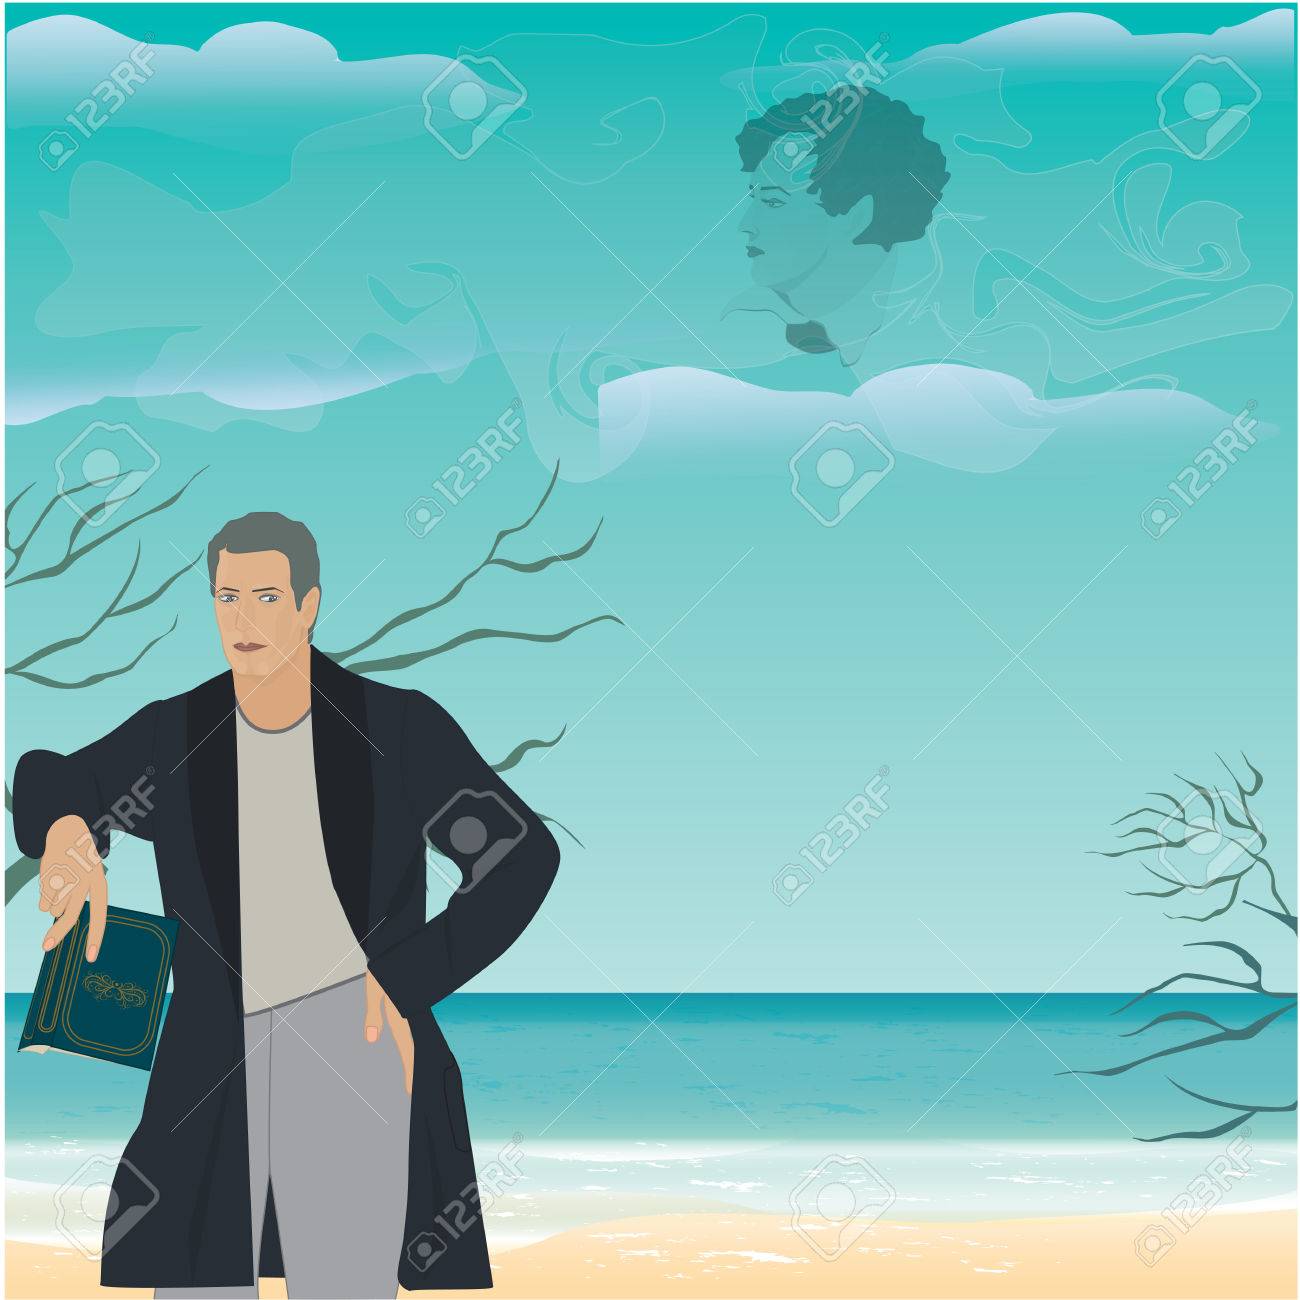 Man With Book In Hand On Background Of Sea Landscape Clouds